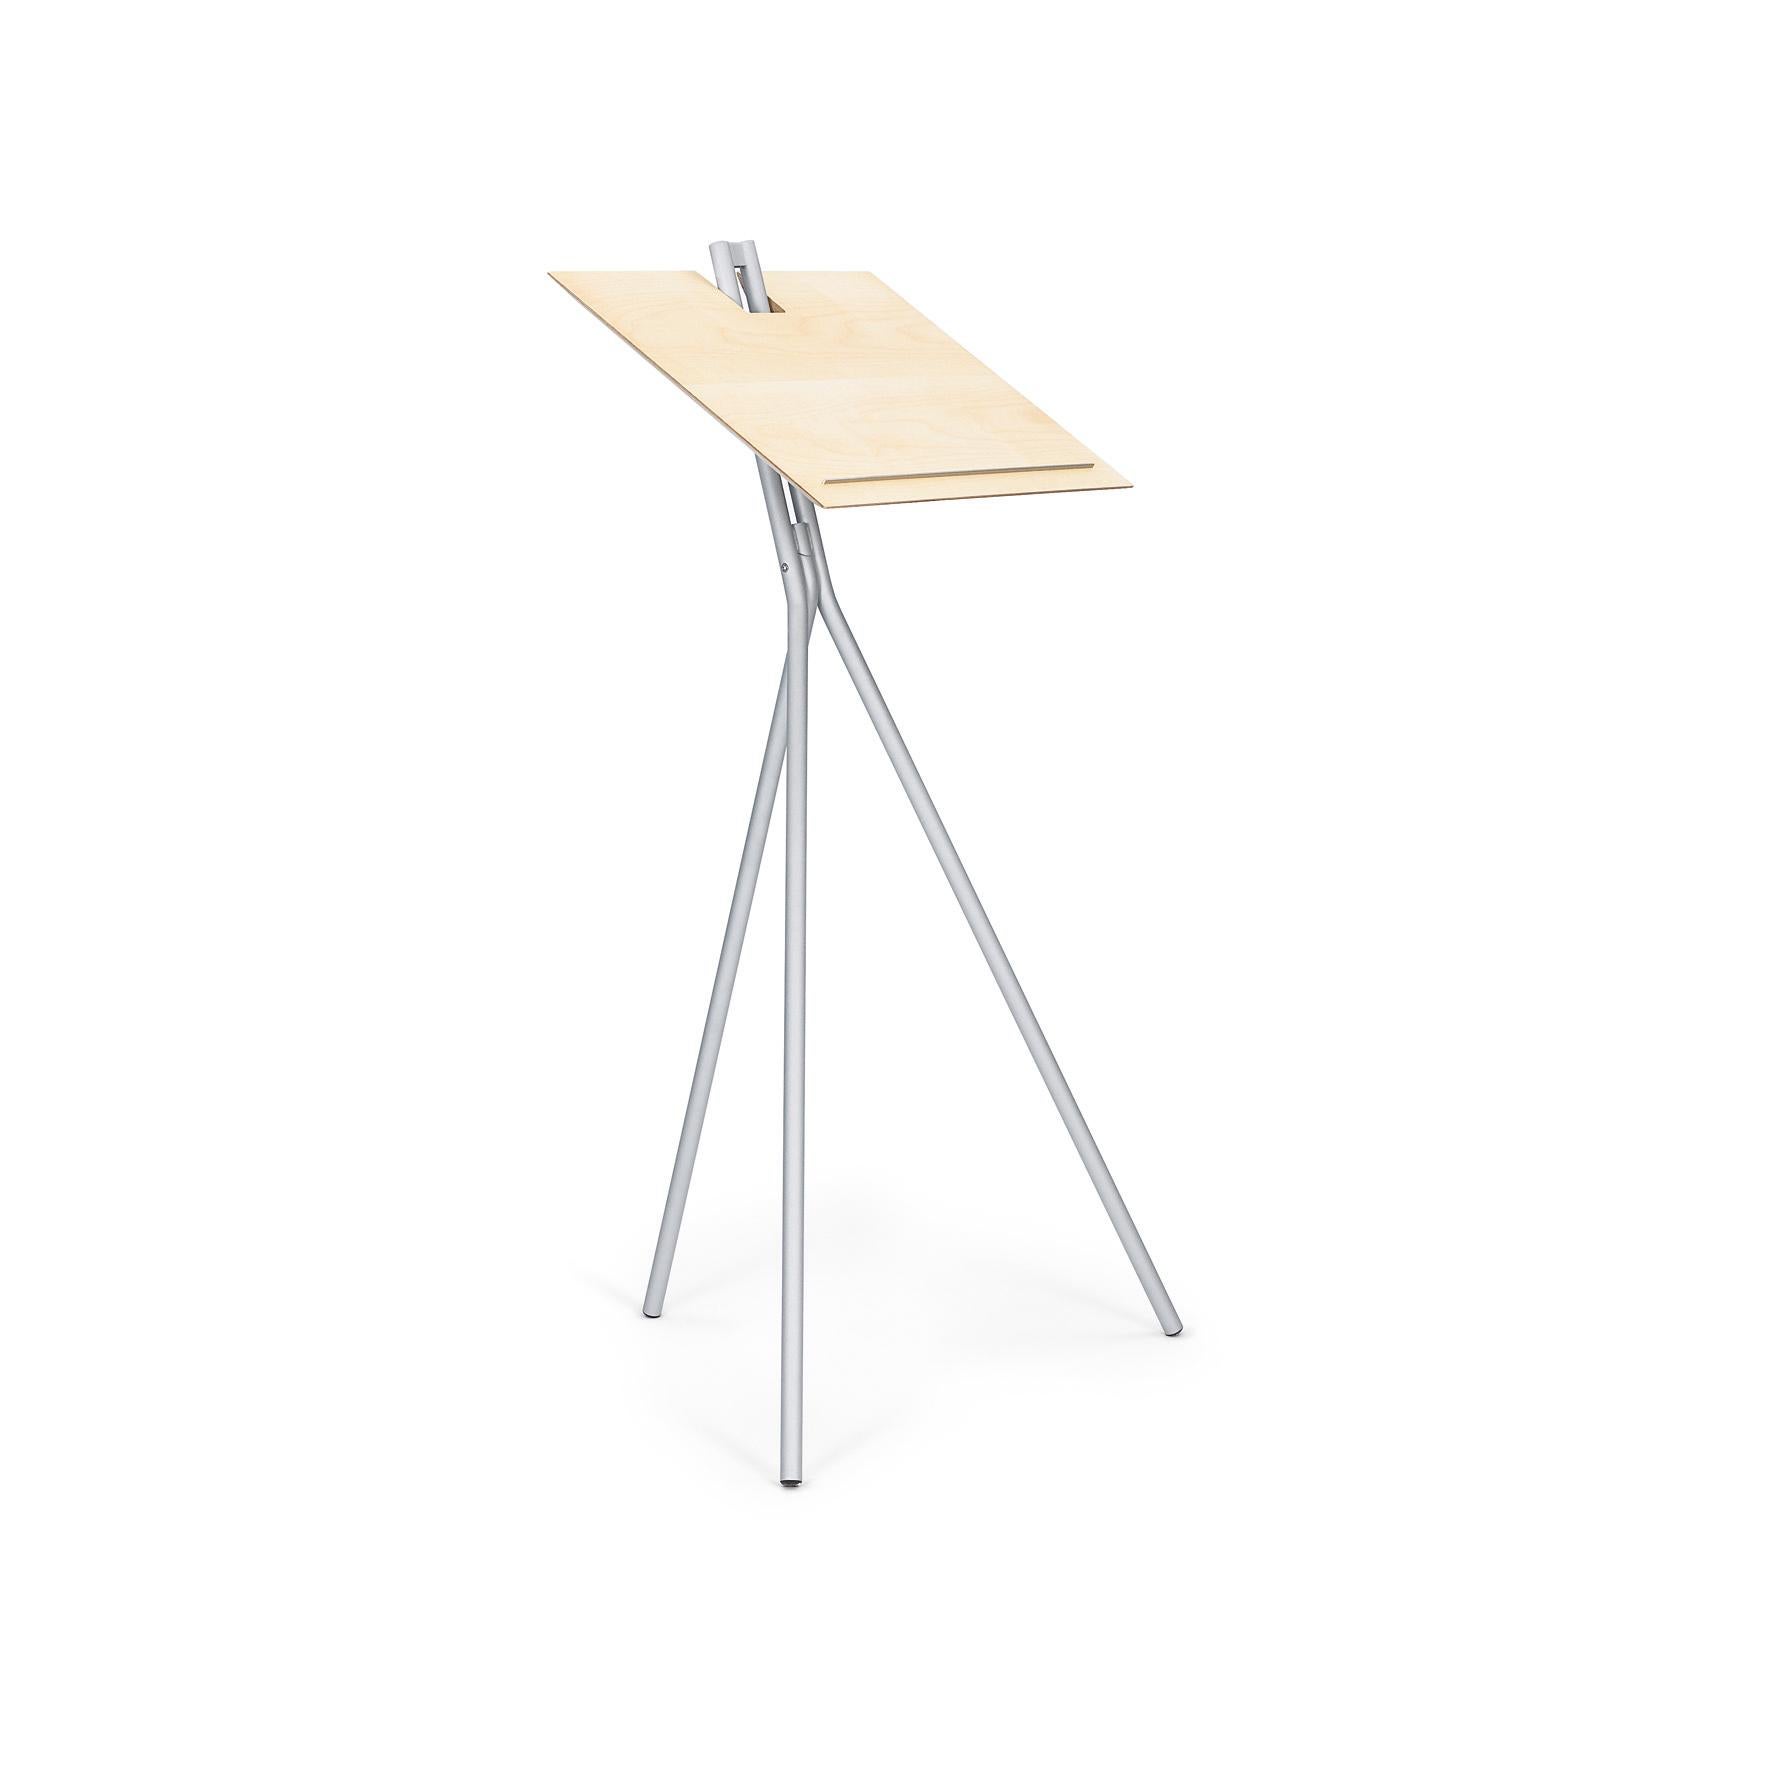 Notos is an essential object in a household or office where artistically inclined persons live and work. That is because this unprecedented, multifunctional piece of furniture transforms itself in no time into a standing desk or a note Stand or an